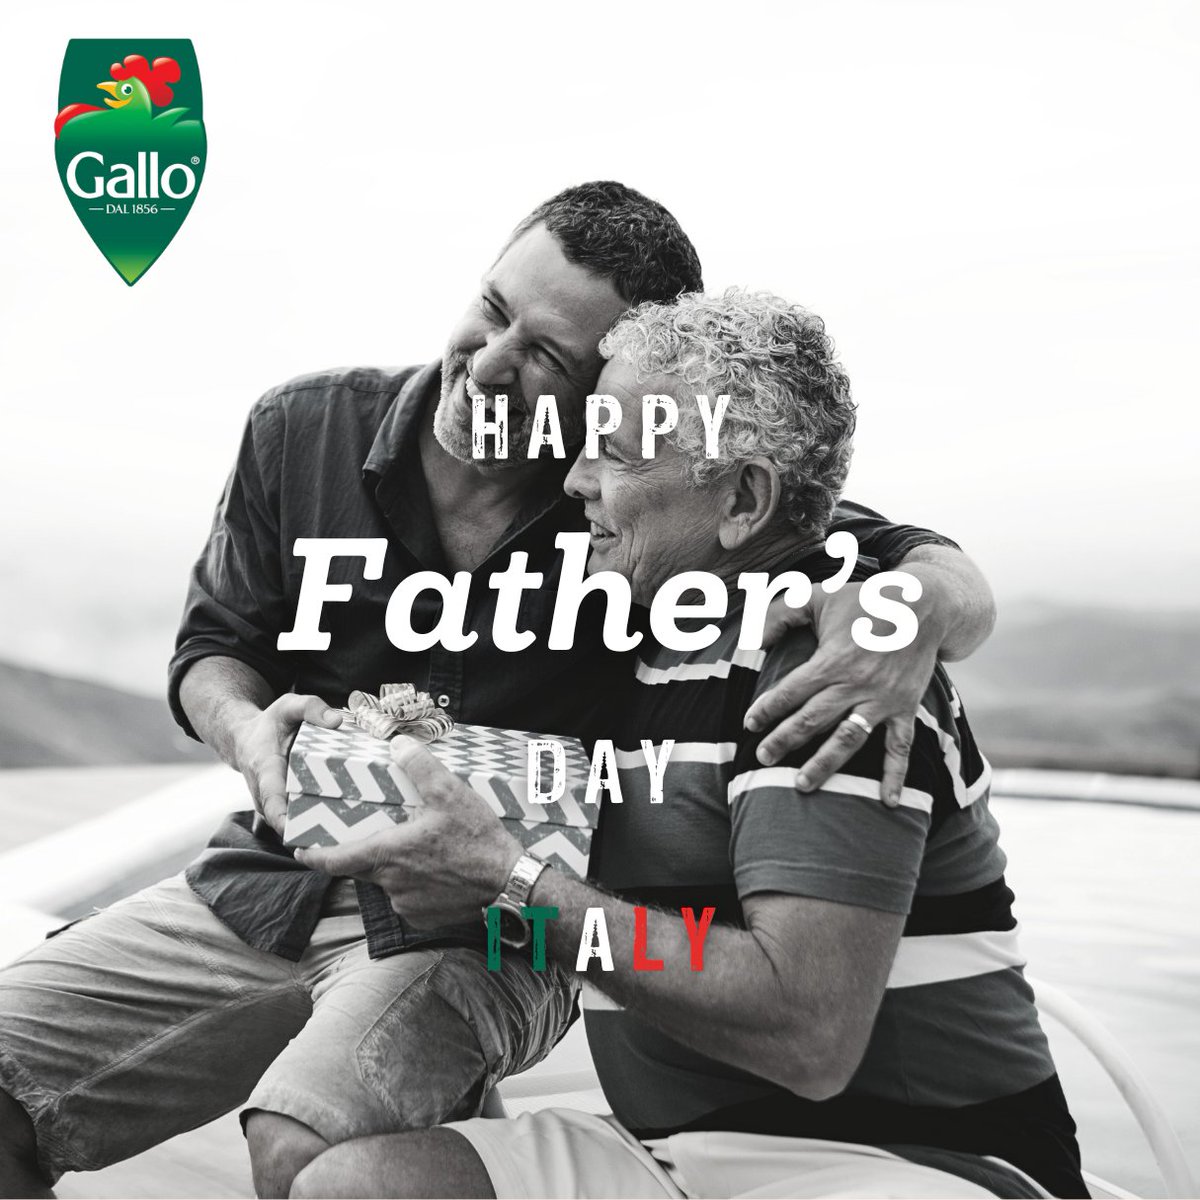 Happy Father's Day Italy from all of us at Riso Gallo! 🇮🇹 #fathersday #italianfathersday #fathersdayitaly #Italianbrand #RisoGallo